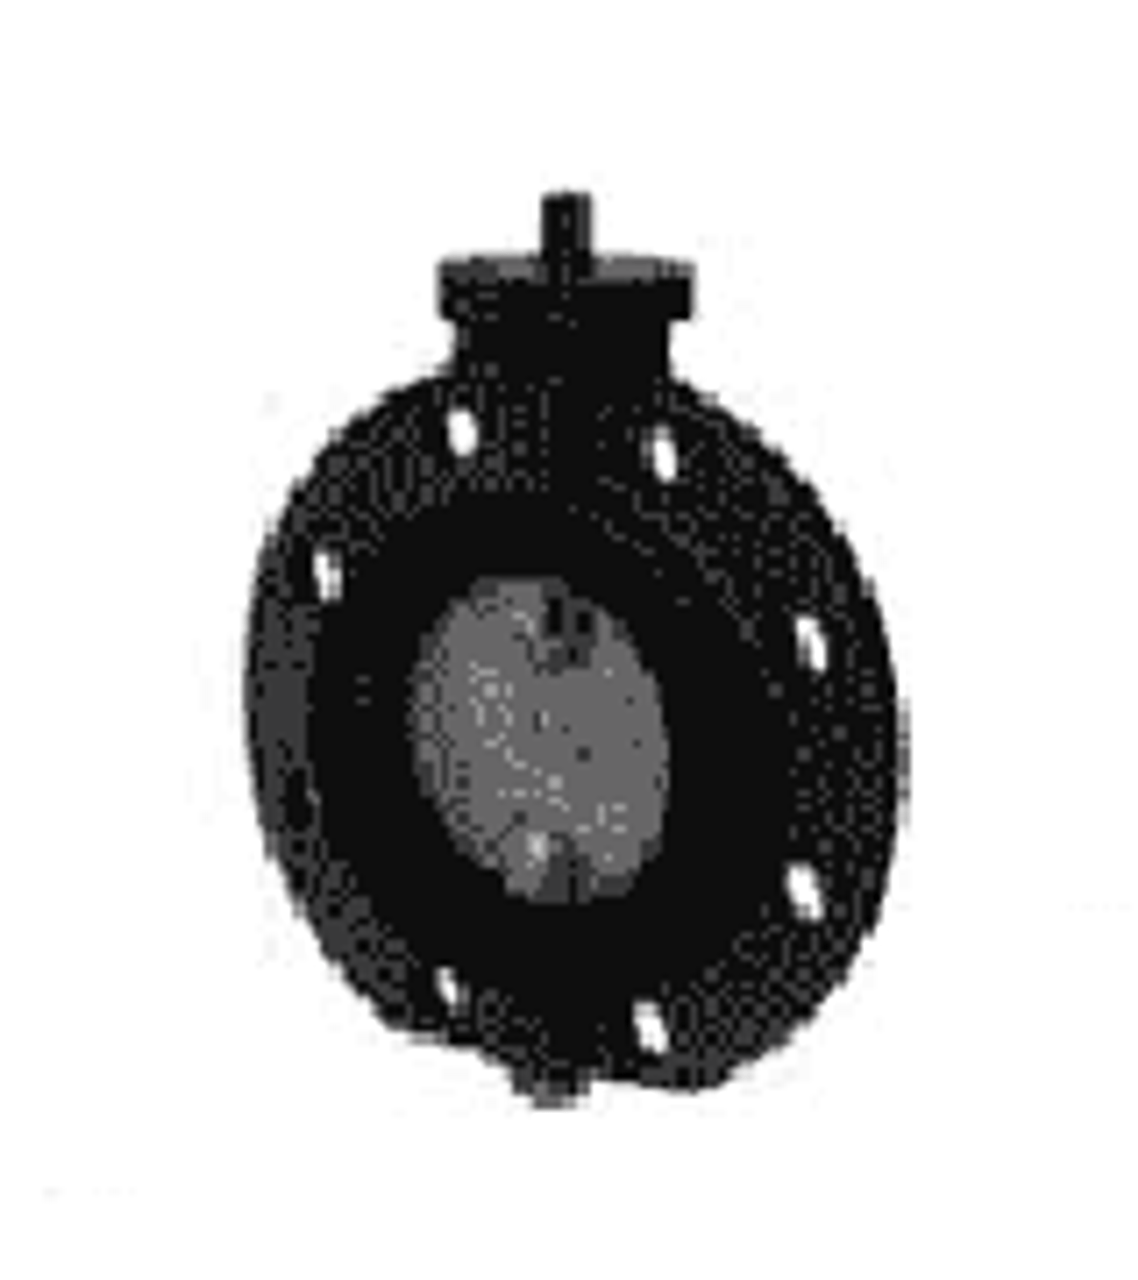 IMPA 756352 Monoflange Butterfly Valve - Ductile Iron - Bronze Disc - NBR Seat - DIN PN10 - short serie - gear operated 250